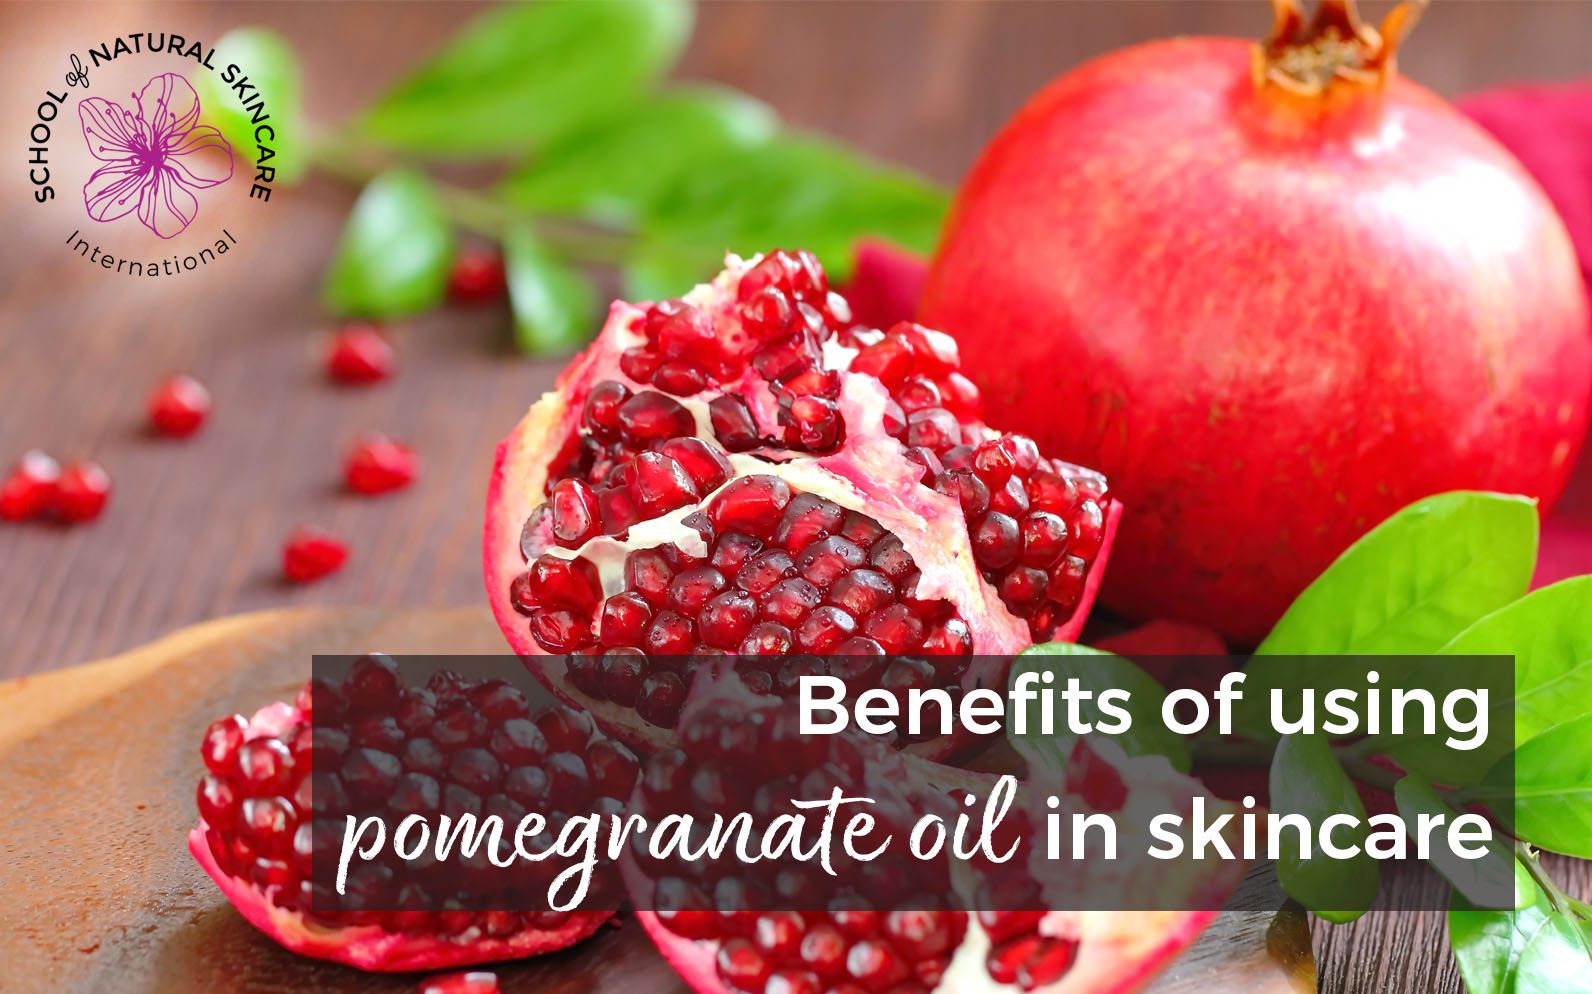 Benefits of using pomegranate oil in skincare - School of Natural Skincare